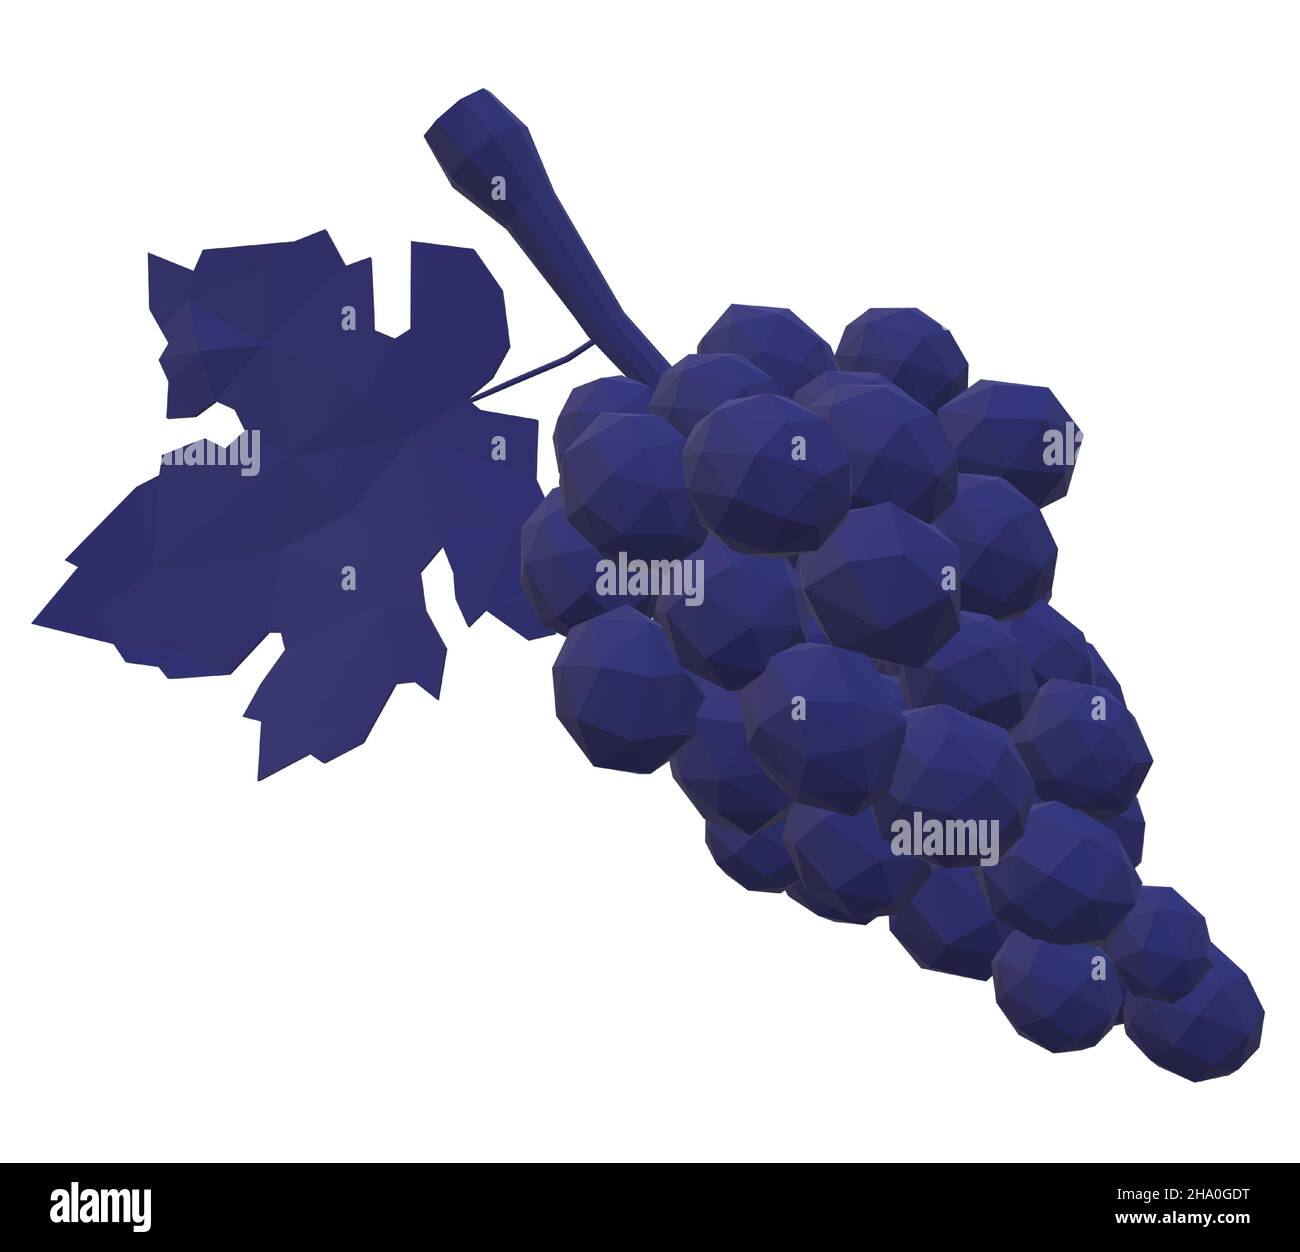 Solid Dark Blue Bunch of Grapes Decoration Figurine Stock Vector